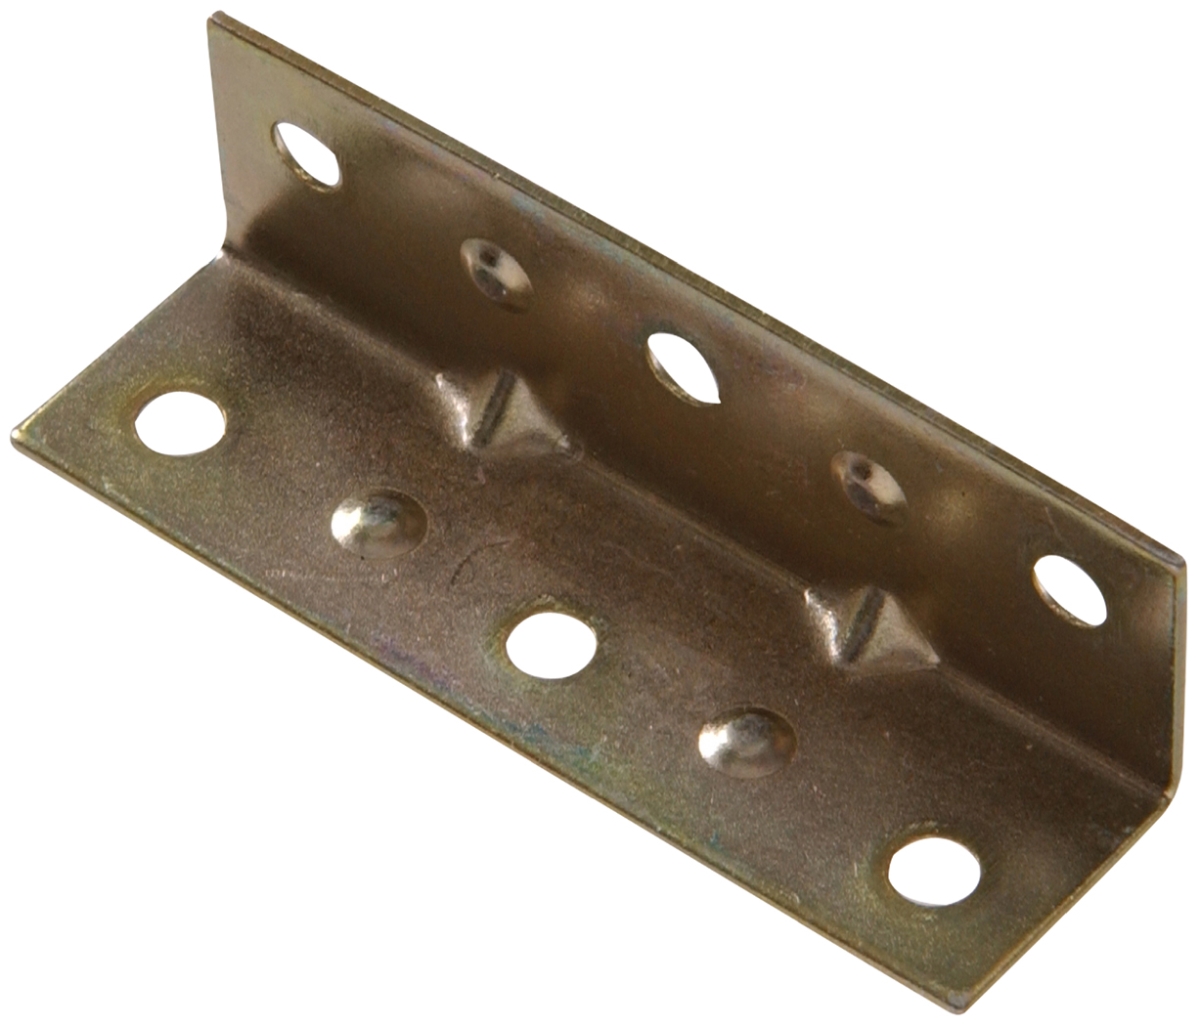 UPC 008236987621 product image for 853074 Carded - Inside Corner Braces, Zinc & Yellow - 1.5 x 0.75 in. | upcitemdb.com